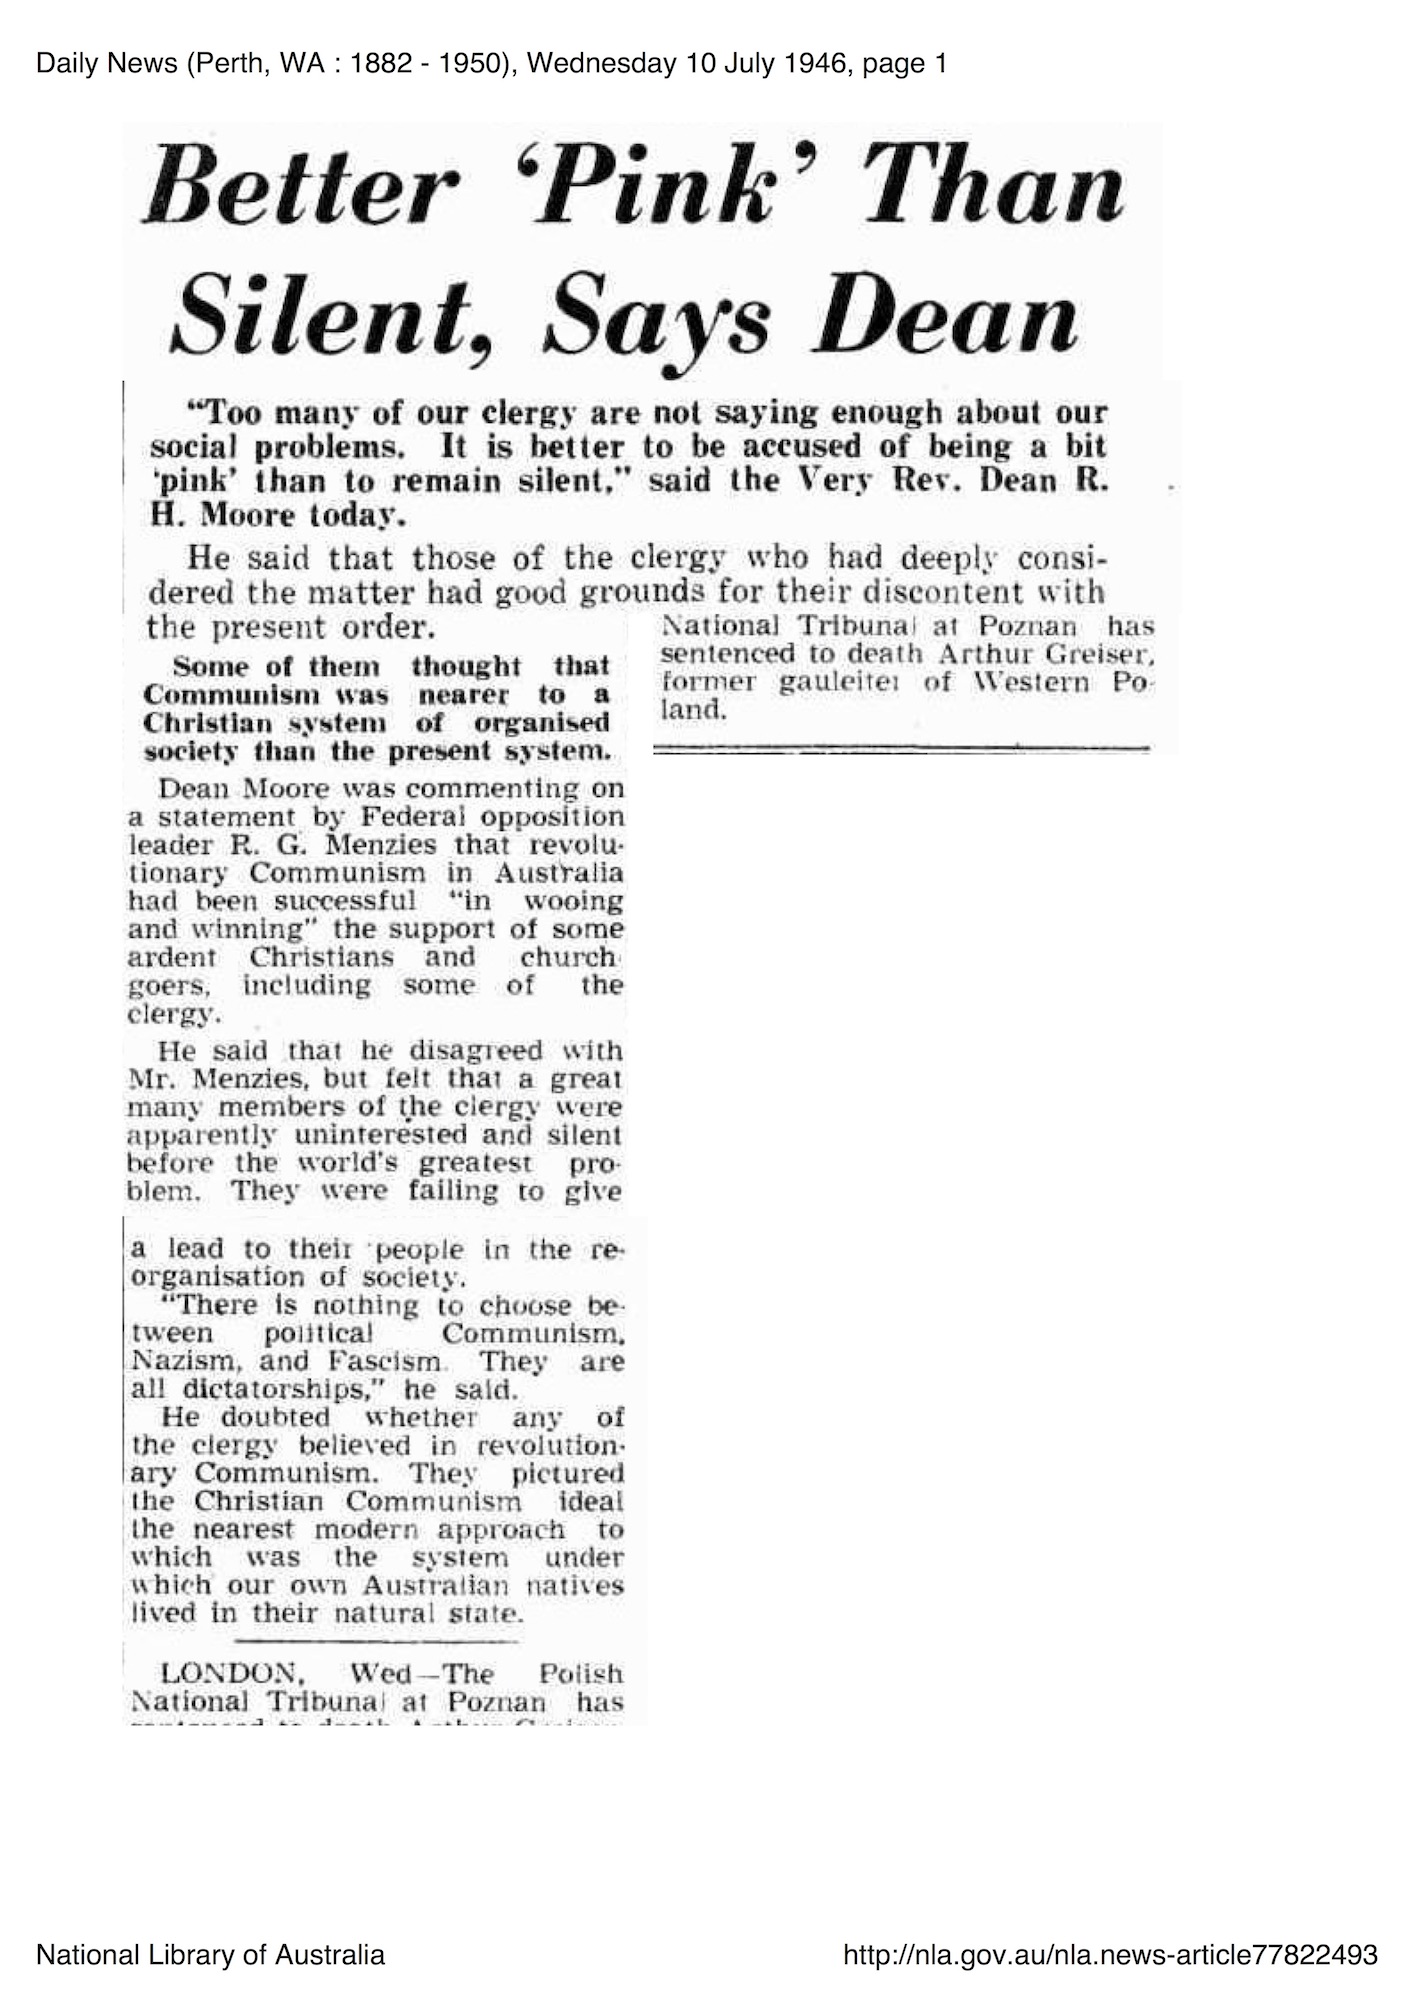 Daily News, 10 July 1946, p. 1, ‘Better “Pink” than Silent, Says Dean’